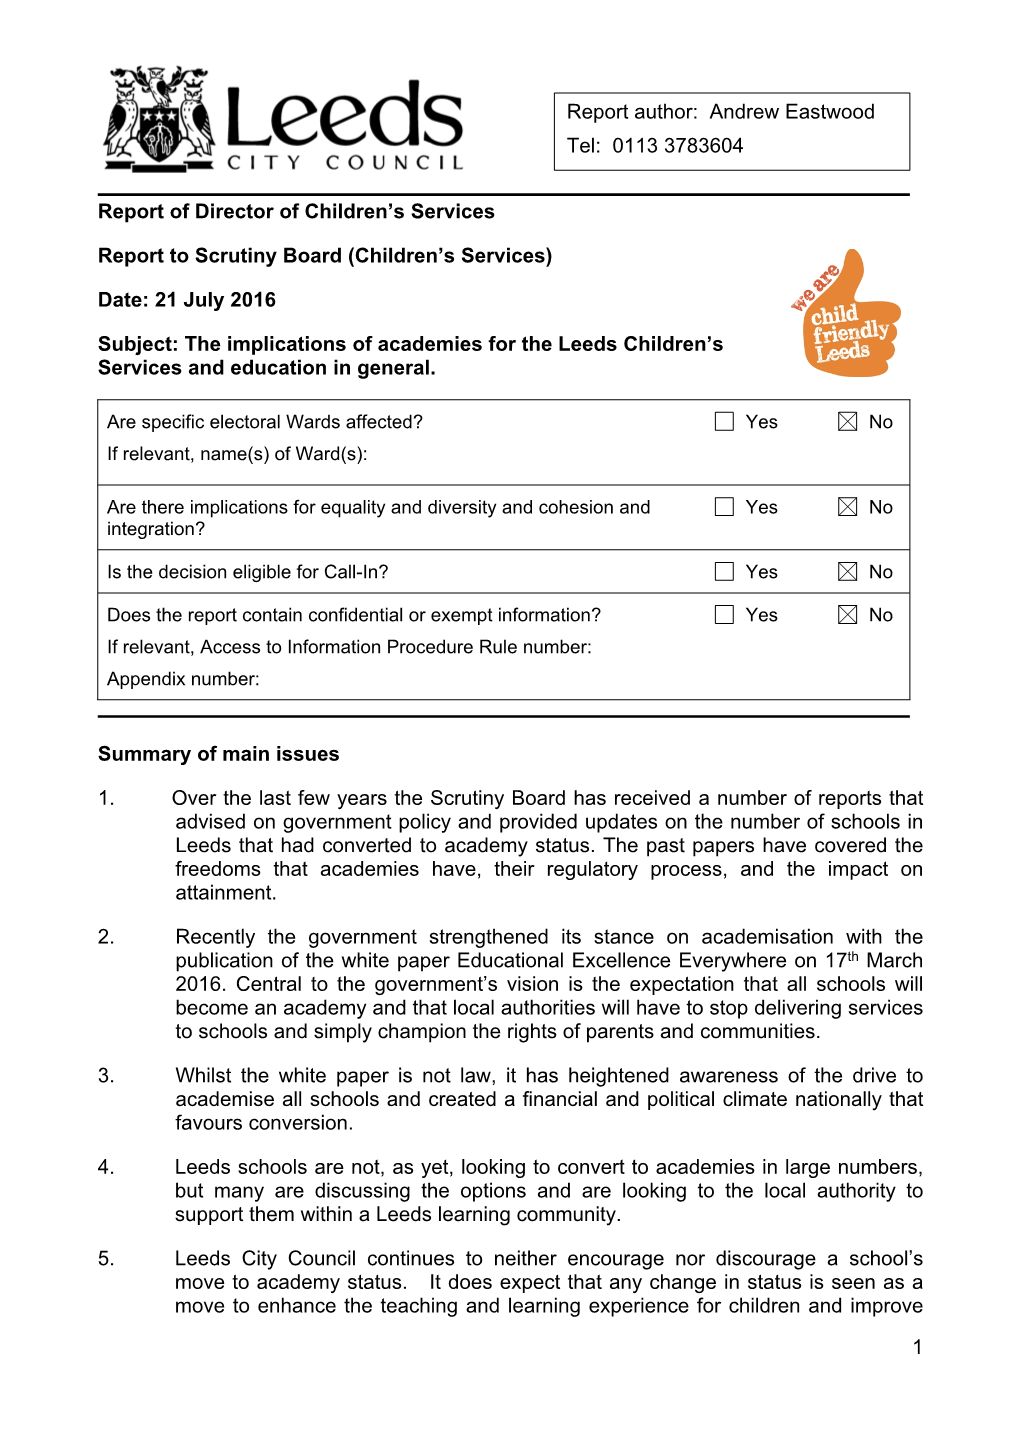 The Implications of Academies for the Leeds Children's Services and Education in General PDF 317 KB